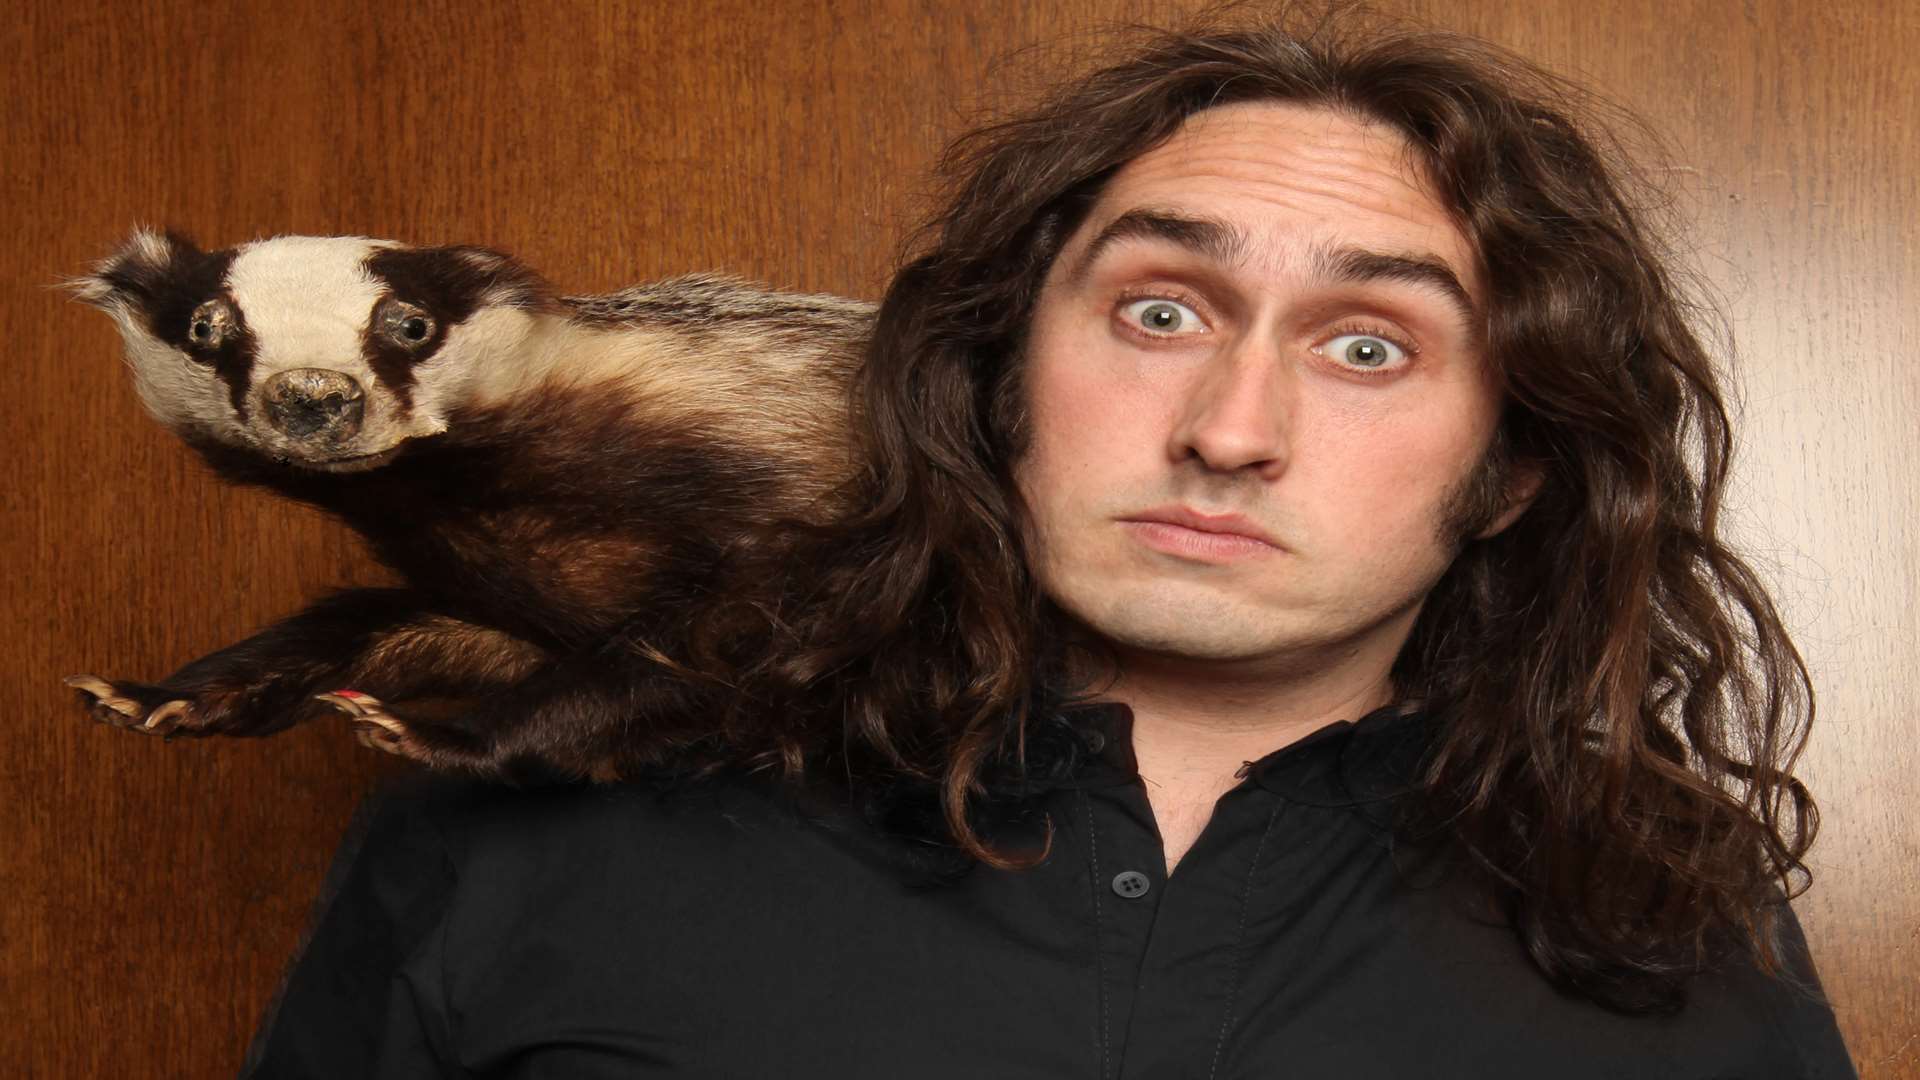 Ross Noble will be going off on a tangent this weekend